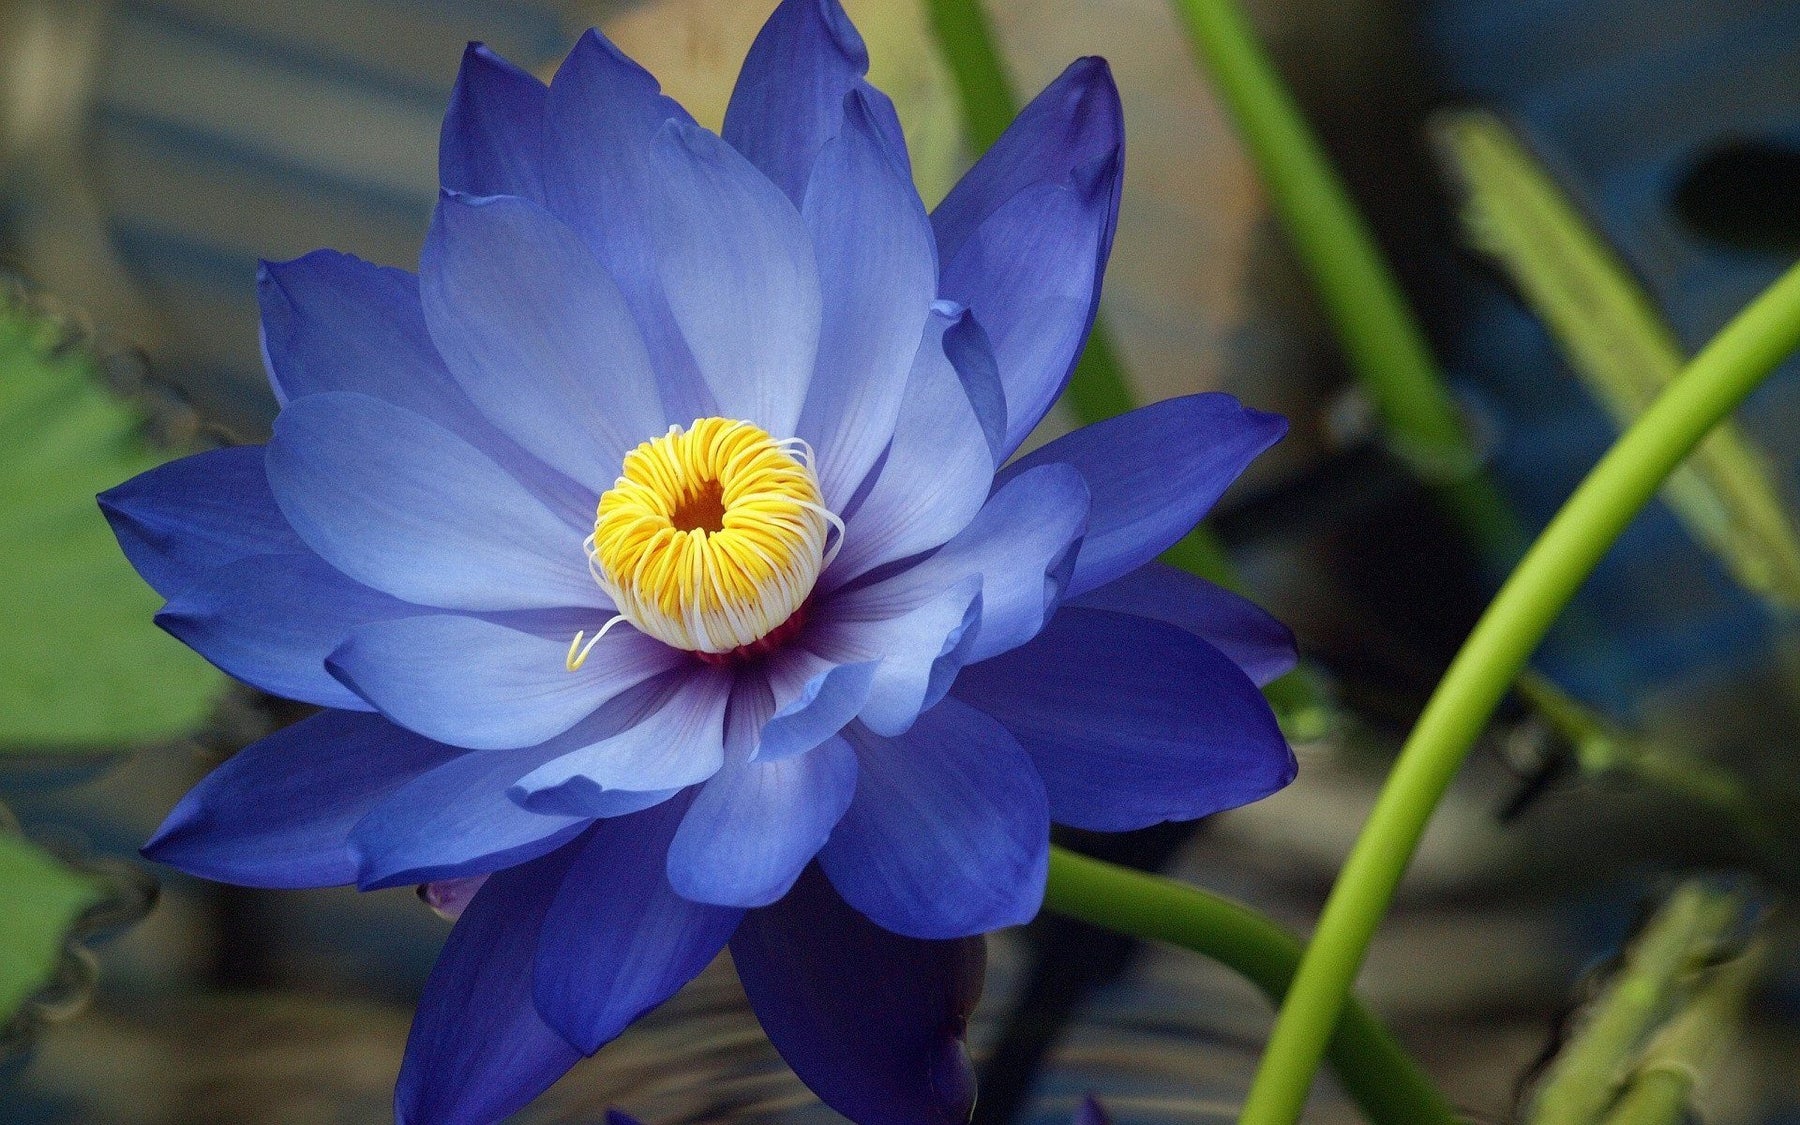 It all started in Egypt. The Blue Lotus is Victory of Spirit over the senses. Wisdom of Knowledge.